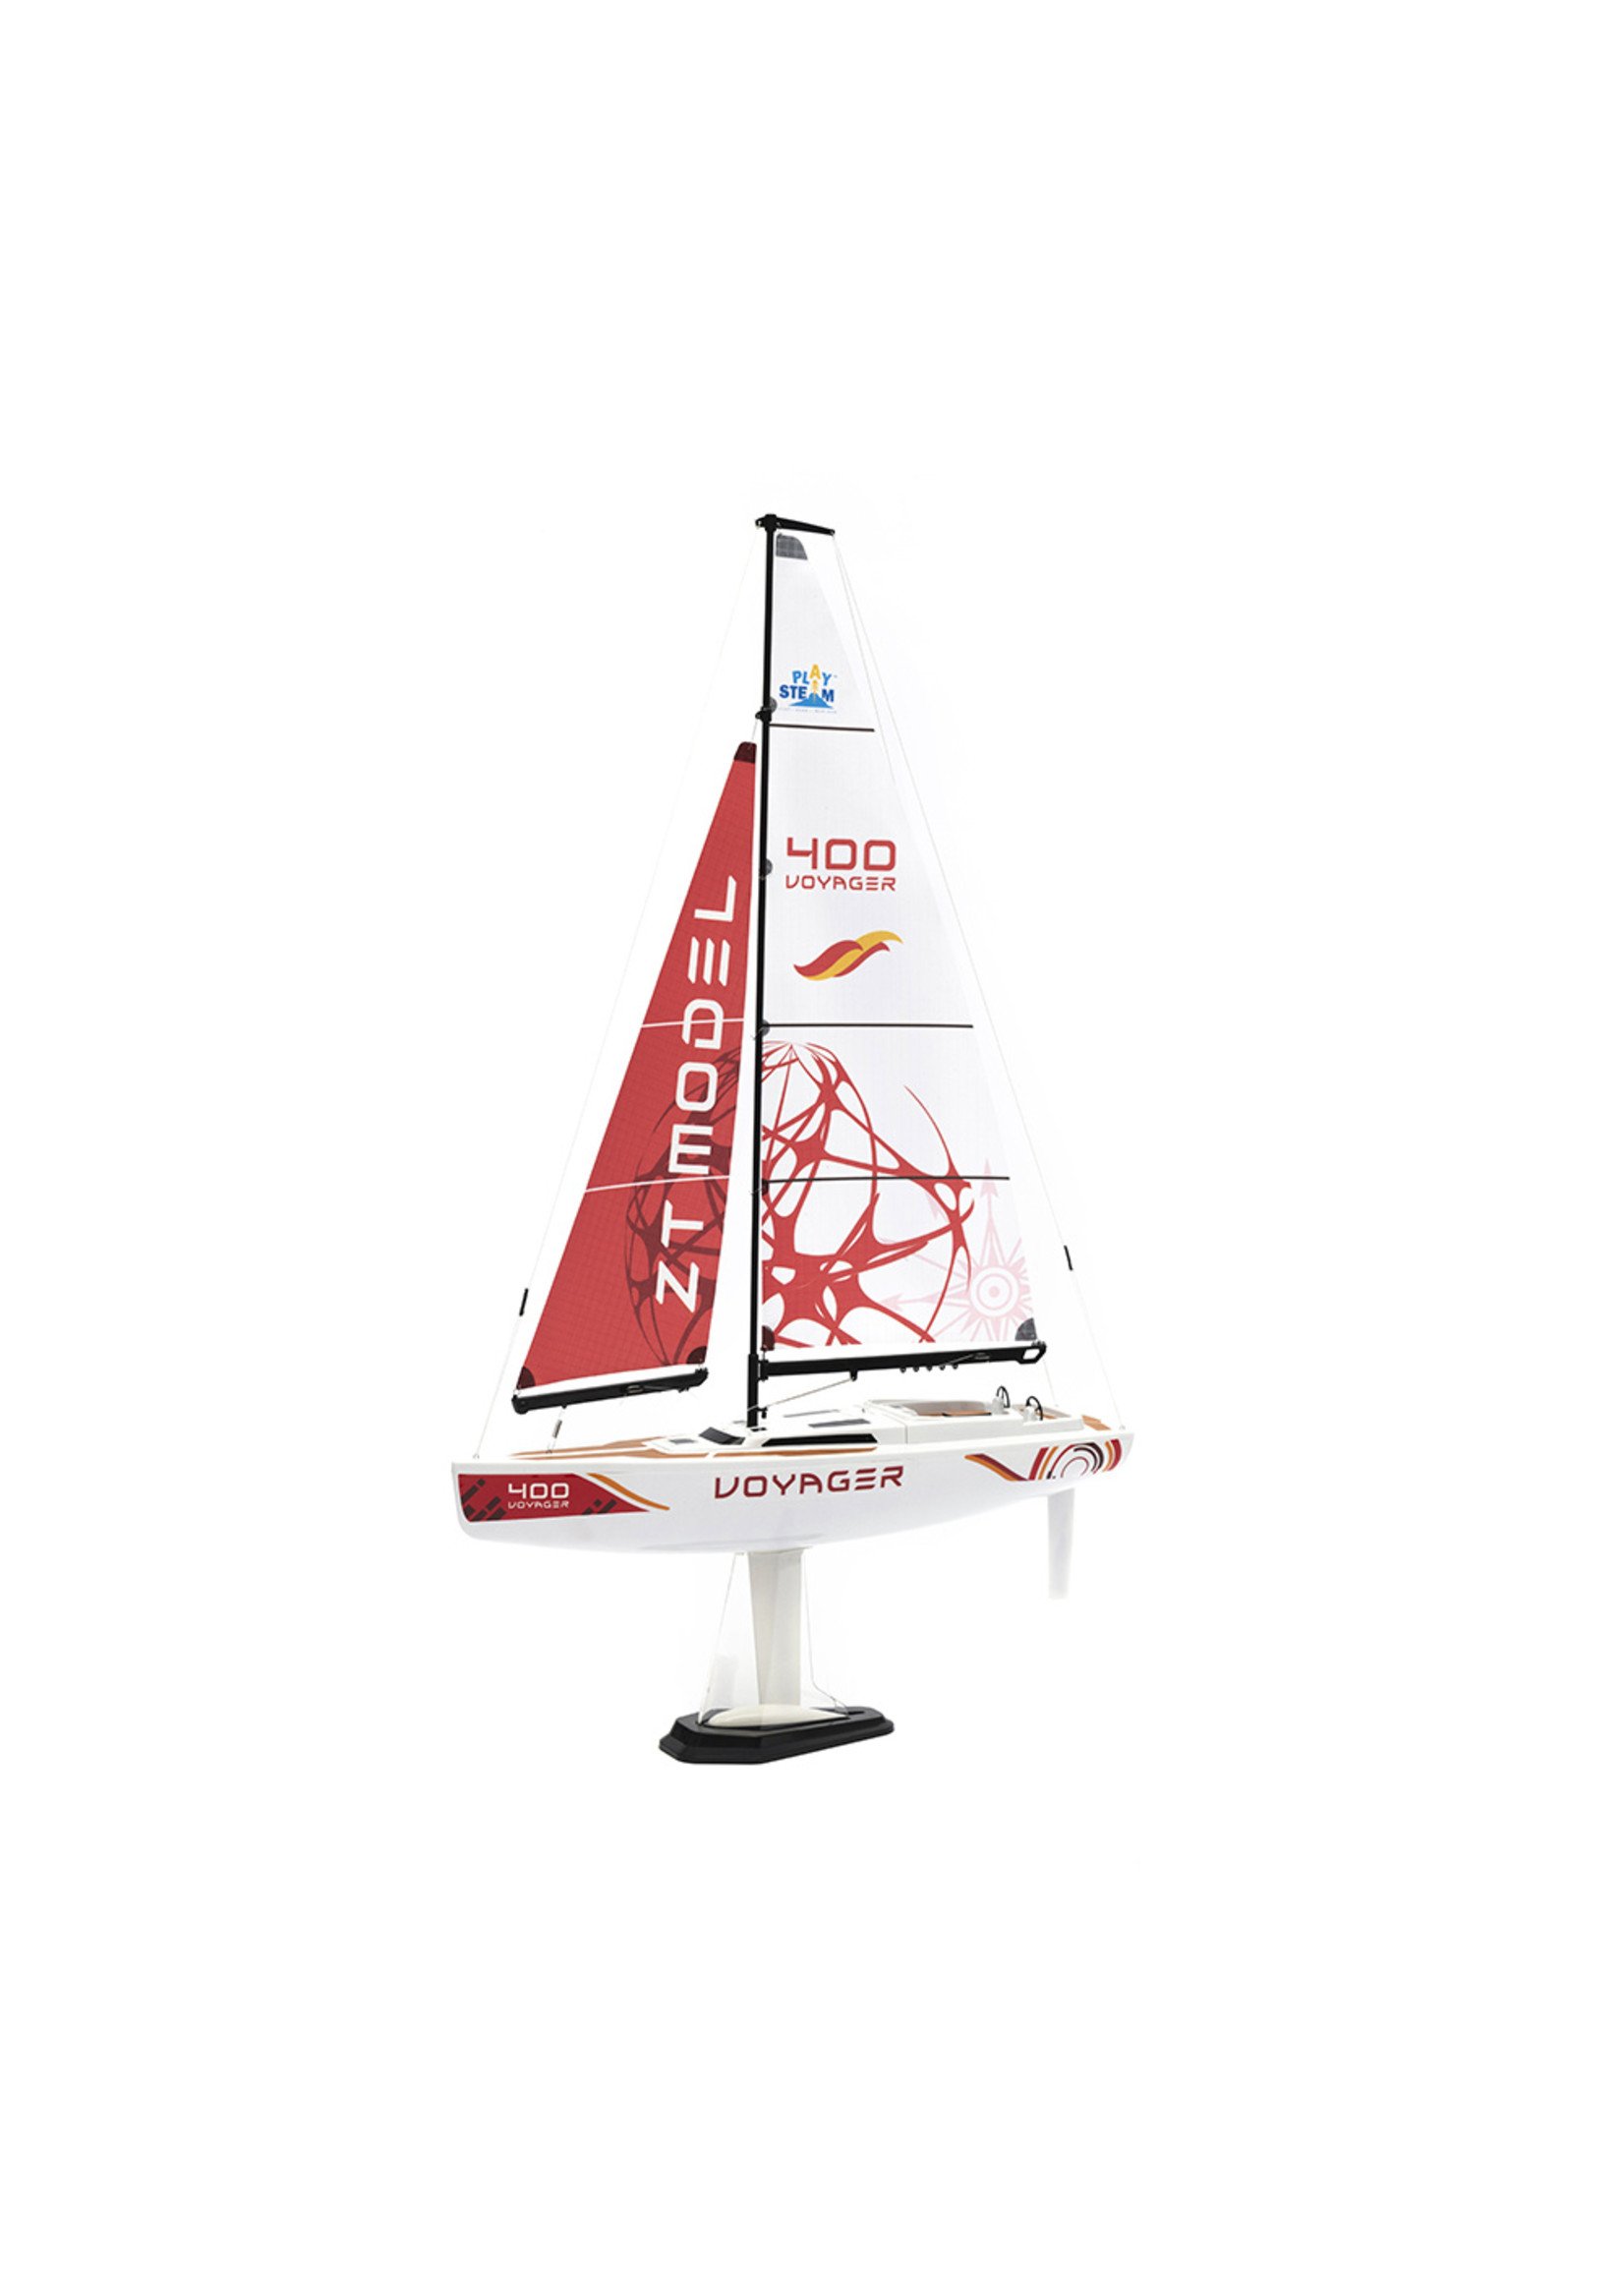 Play Steam Voyager 400 Wind-Power RC Sailboat - Red